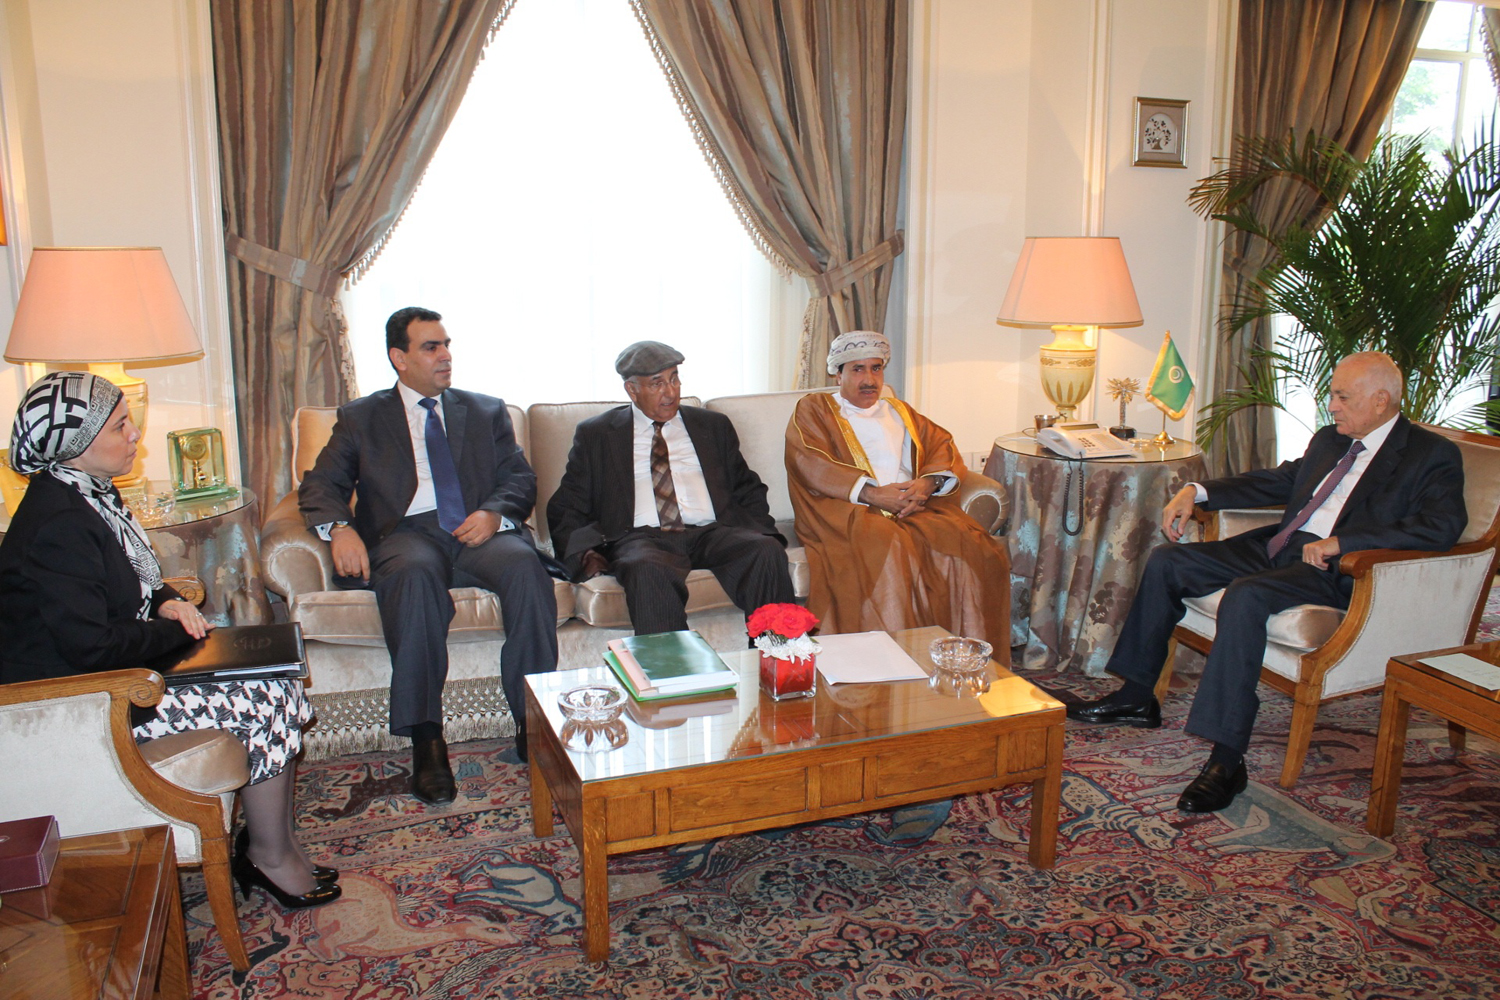 Arab League Secretary General Nabil Al-Araby in the meeting after the ceremony of teh Arab Documents Day